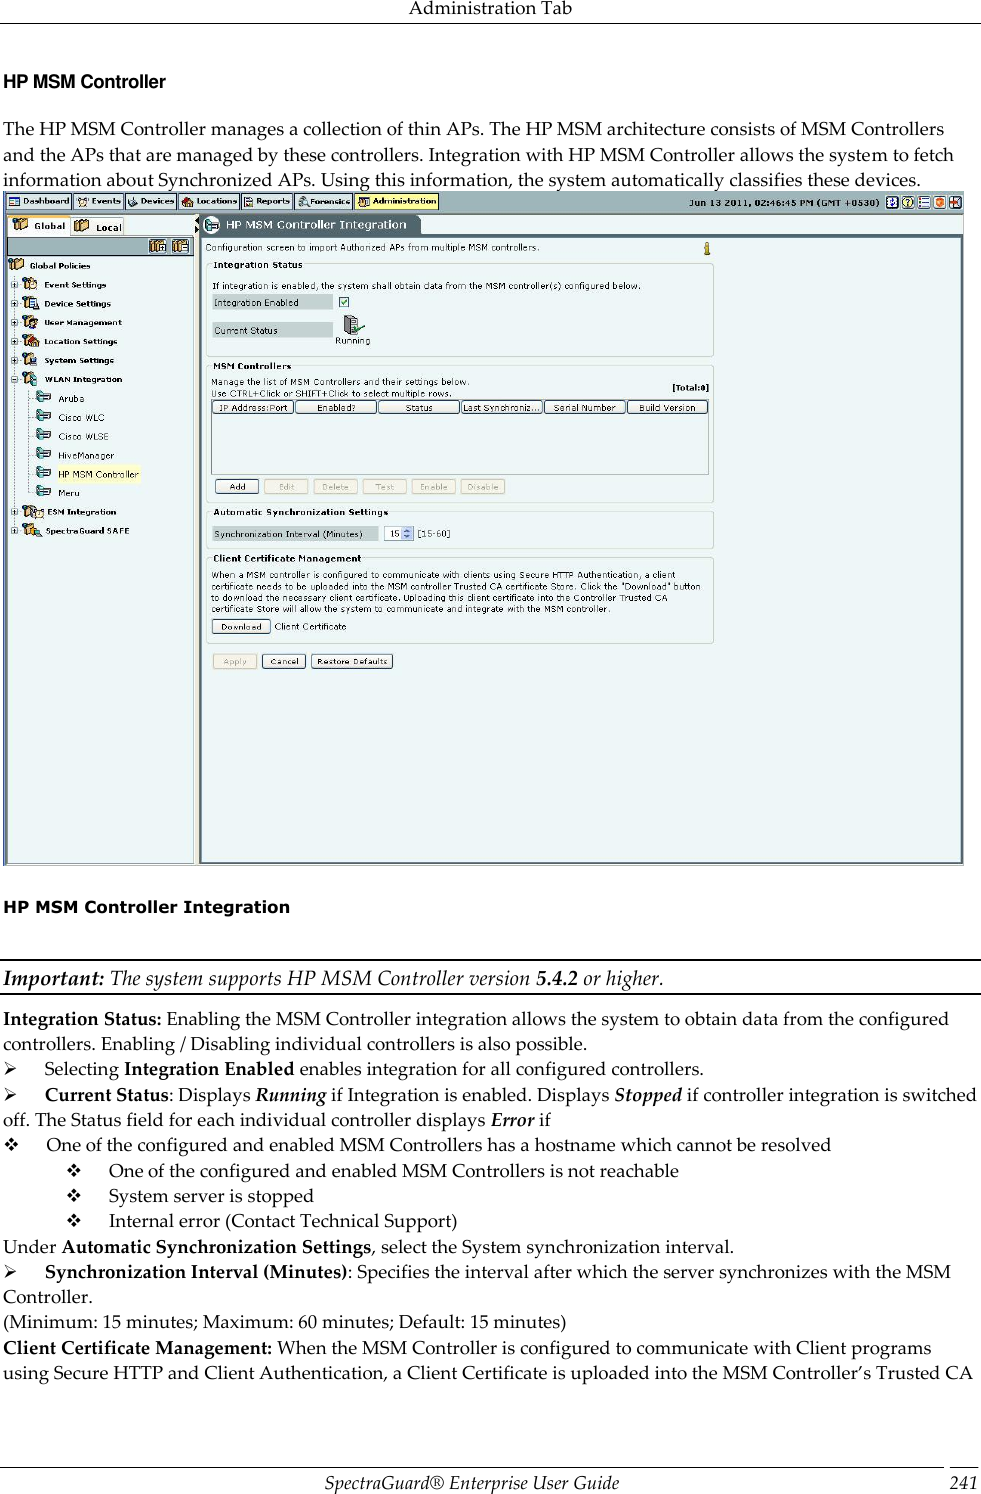 Administration Tab SpectraGuard®  Enterprise User Guide 241 HP MSM Controller The HP MSM Controller manages a collection of thin APs. The HP MSM architecture consists of MSM Controllers and the APs that are managed by these controllers. Integration with HP MSM Controller allows the system to fetch information about Synchronized APs. Using this information, the system automatically classifies these devices.    HP MSM Controller Integration   Important: The system supports HP MSM Controller version 5.4.2 or higher. Integration Status: Enabling the MSM Controller integration allows the system to obtain data from the configured controllers. Enabling / Disabling individual controllers is also possible.        Selecting Integration Enabled enables integration for all configured controllers.        Current Status: Displays Running if Integration is enabled. Displays Stopped if controller integration is switched off. The Status field for each individual controller displays Error if        One of the configured and enabled MSM Controllers has a hostname which cannot be resolved        One of the configured and enabled MSM Controllers is not reachable        System server is stopped        Internal error (Contact Technical Support) Under Automatic Synchronization Settings, select the System synchronization interval.        Synchronization Interval (Minutes): Specifies the interval after which the server synchronizes with the MSM Controller. (Minimum: 15 minutes; Maximum: 60 minutes; Default: 15 minutes) Client Certificate Management: When the MSM Controller is configured to communicate with Client programs using Secure HTTP and Client Authentication, a Client Certificate is uploaded into the MSM Controller’s Trusted CA 